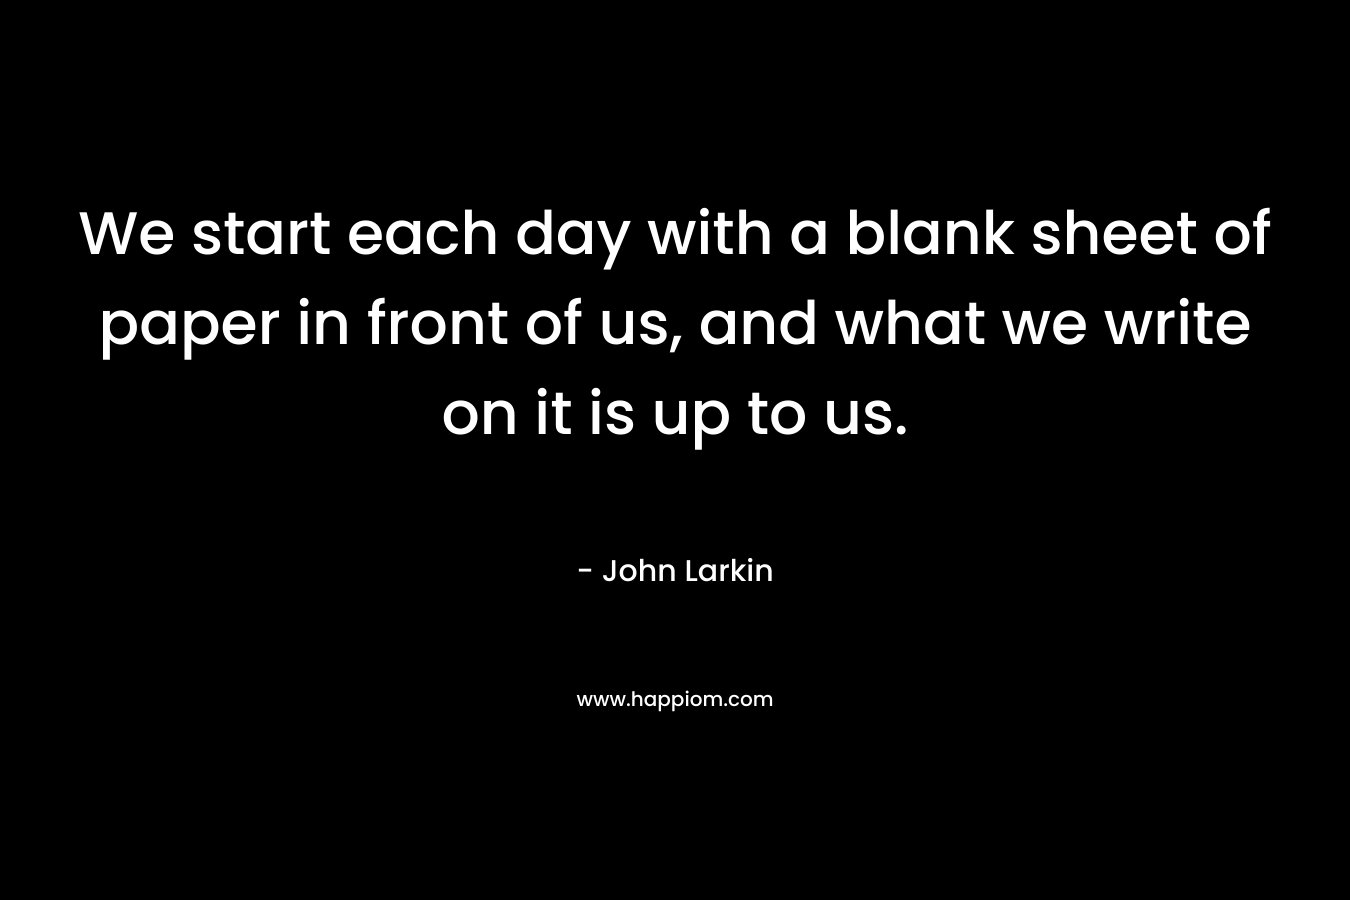 We start each day with a blank sheet of paper in front of us, and what we write on it is up to us. – John Larkin